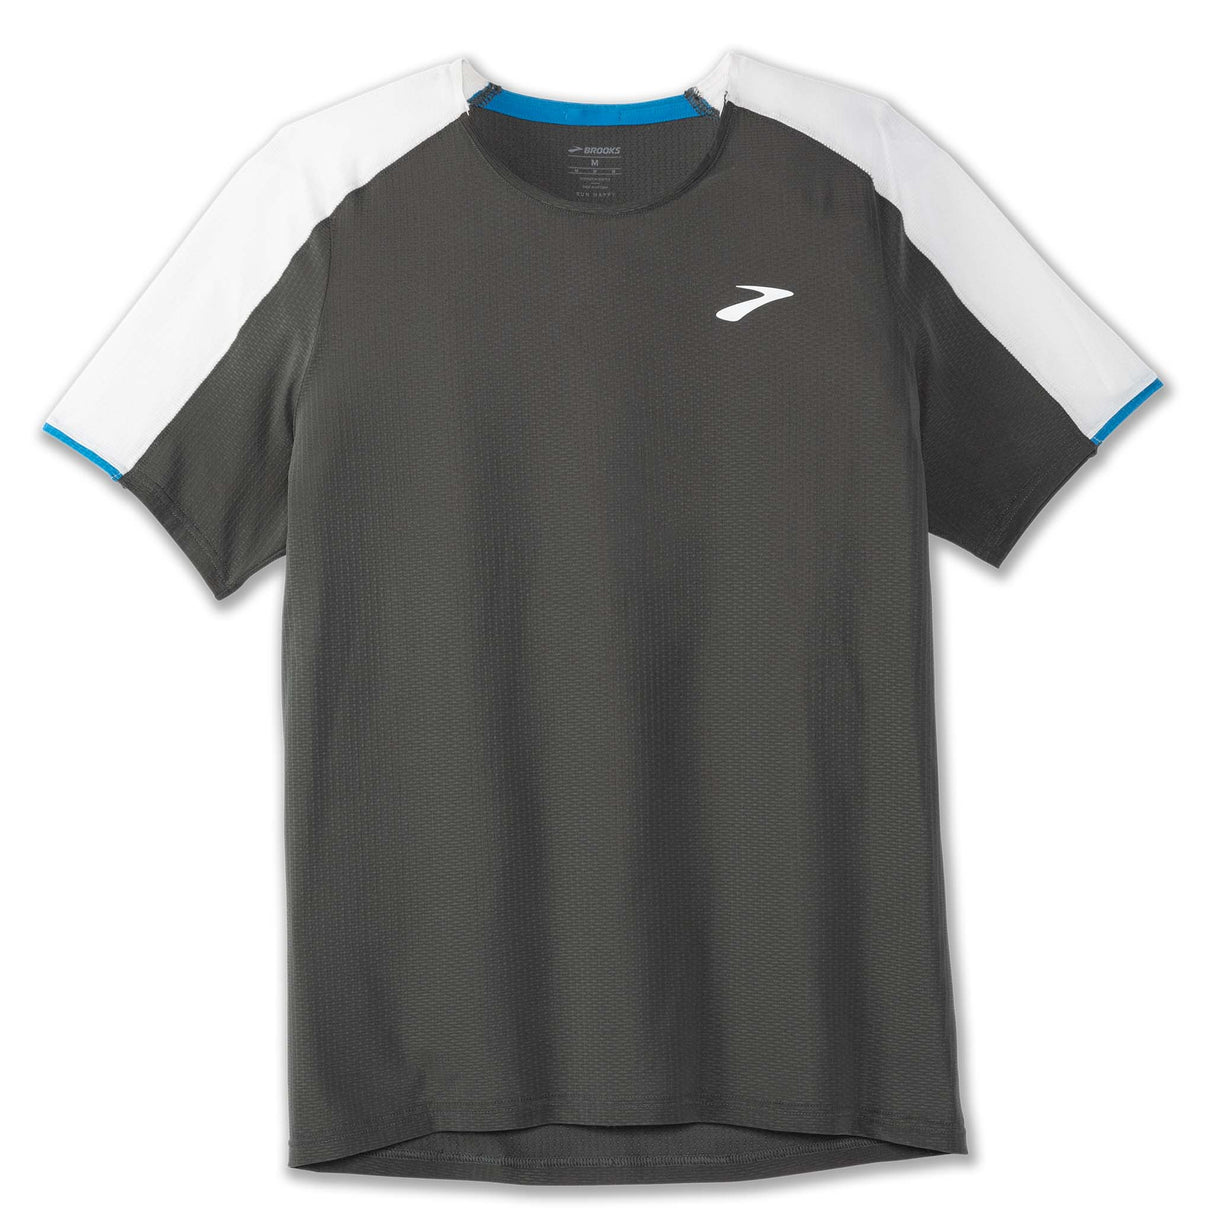 Brooks Atmosphere T-shirt de course oyster icy grey pour homme